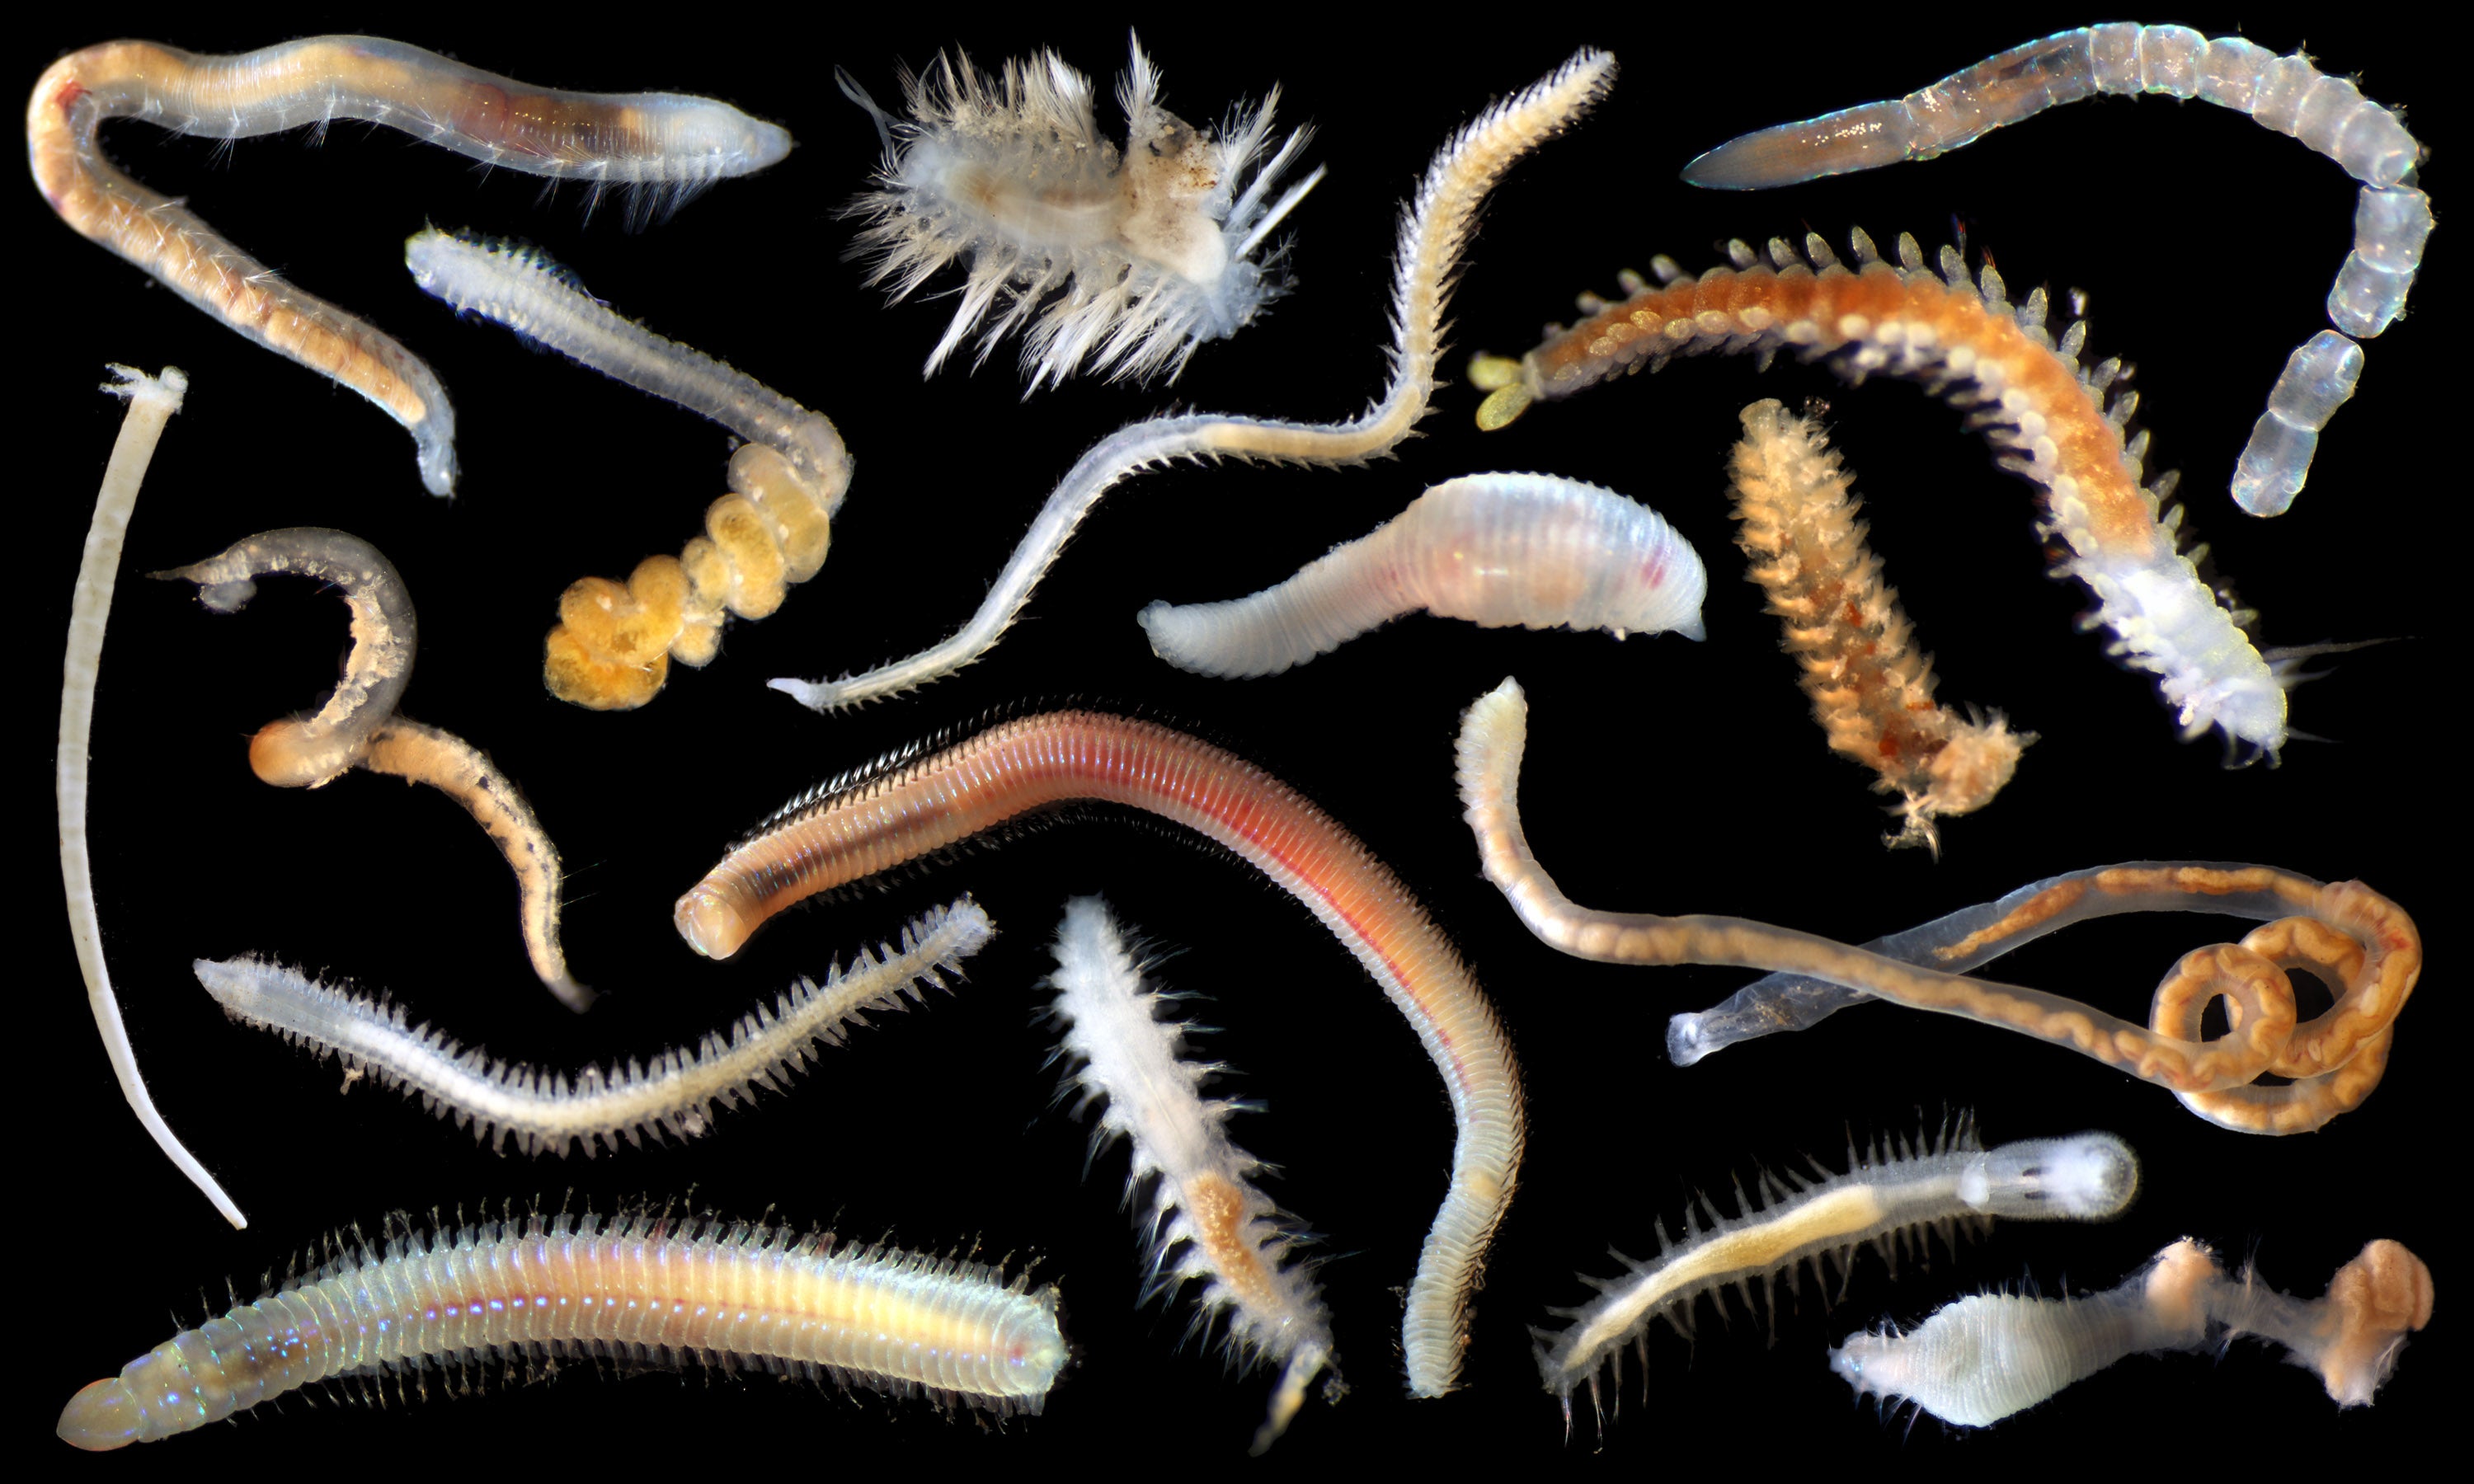 An array of unidentified annelids.  (Photo: SMARTEX Project, Natural Environment Research Council, UK smartexccz.org)